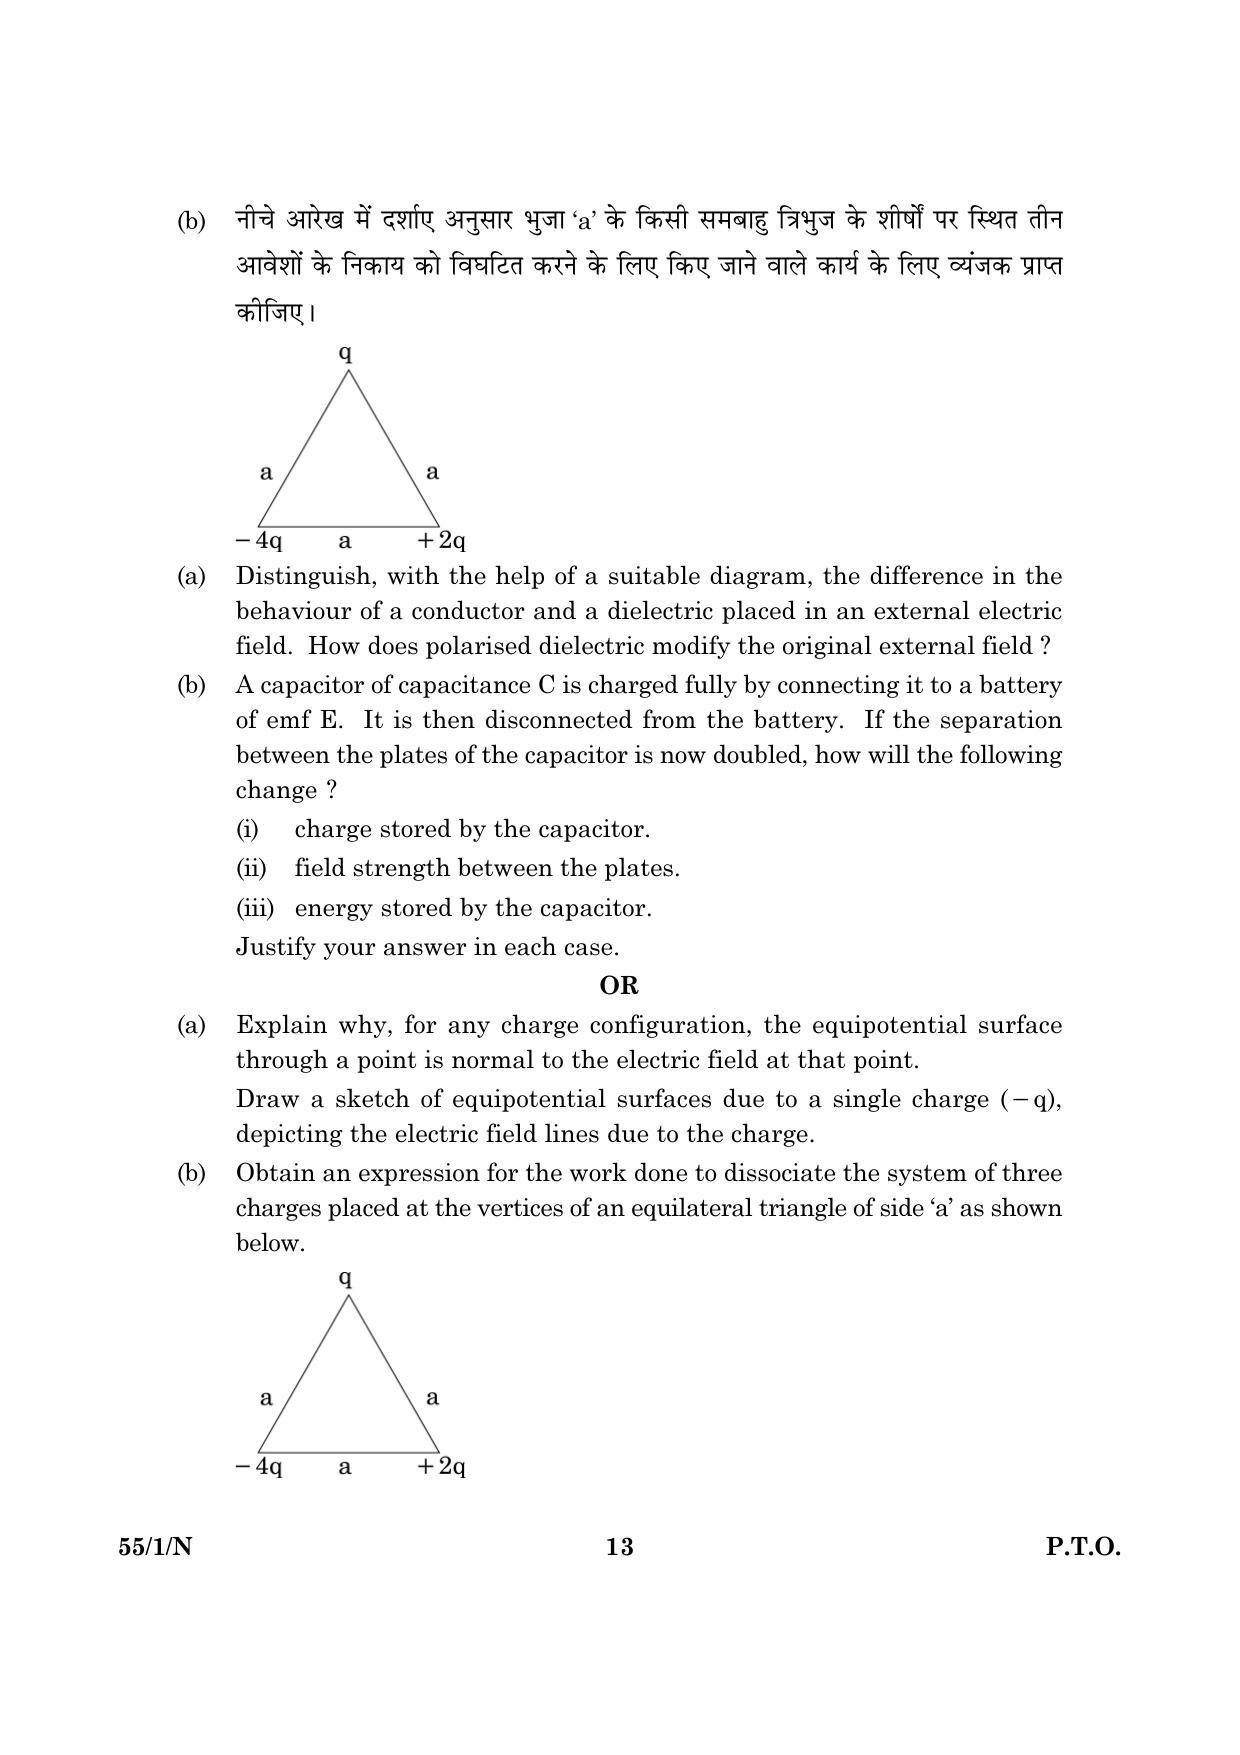 CBSE Class 12 055 Set 1 N Physics Theory 2016 Question Paper - Page 13